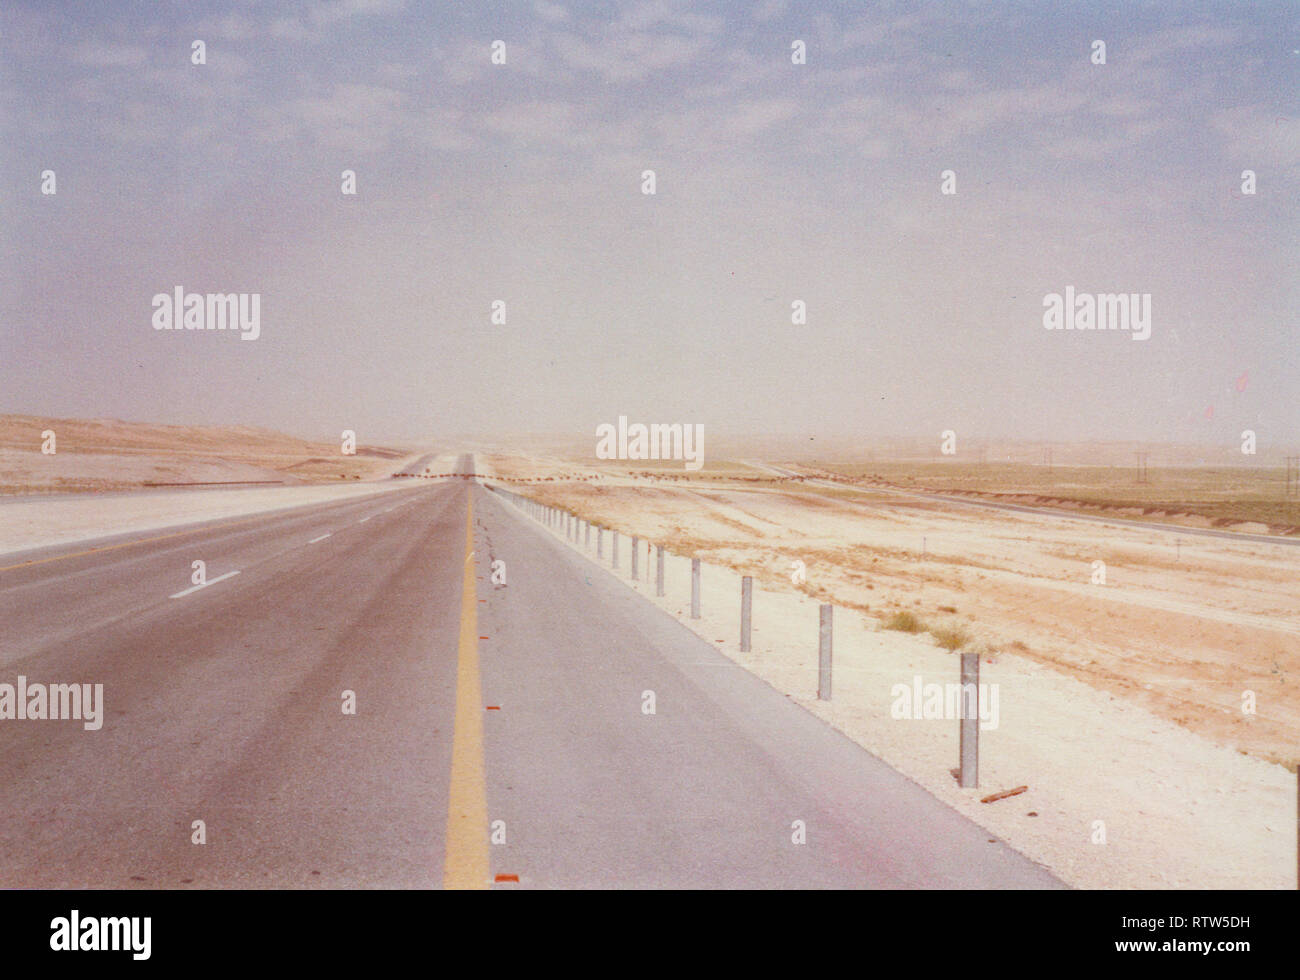 The road from the Abqaiq, a Saudi Aramco camp, to Qarrayah Beach, the town's closet private beach. The road is filled with sand dunes and often has camel herds driven by shepherds. Stock Photo